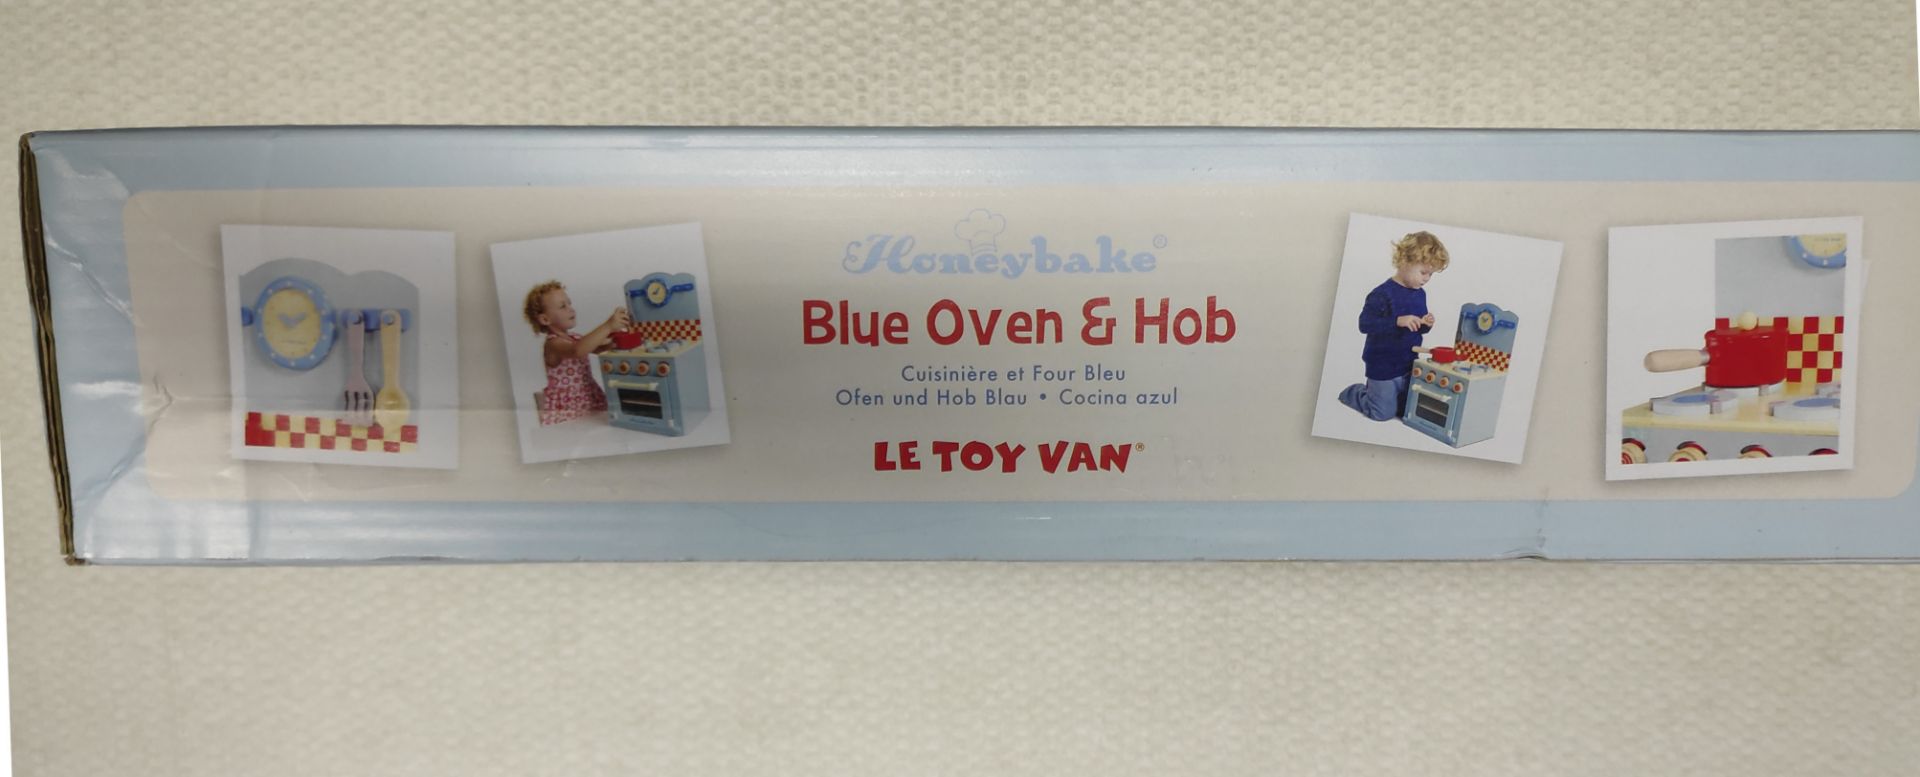 1 x Le Toy Van Honeybake Childrens Wooden Blue Oven & Hob - New/Boxed - Image 7 of 7